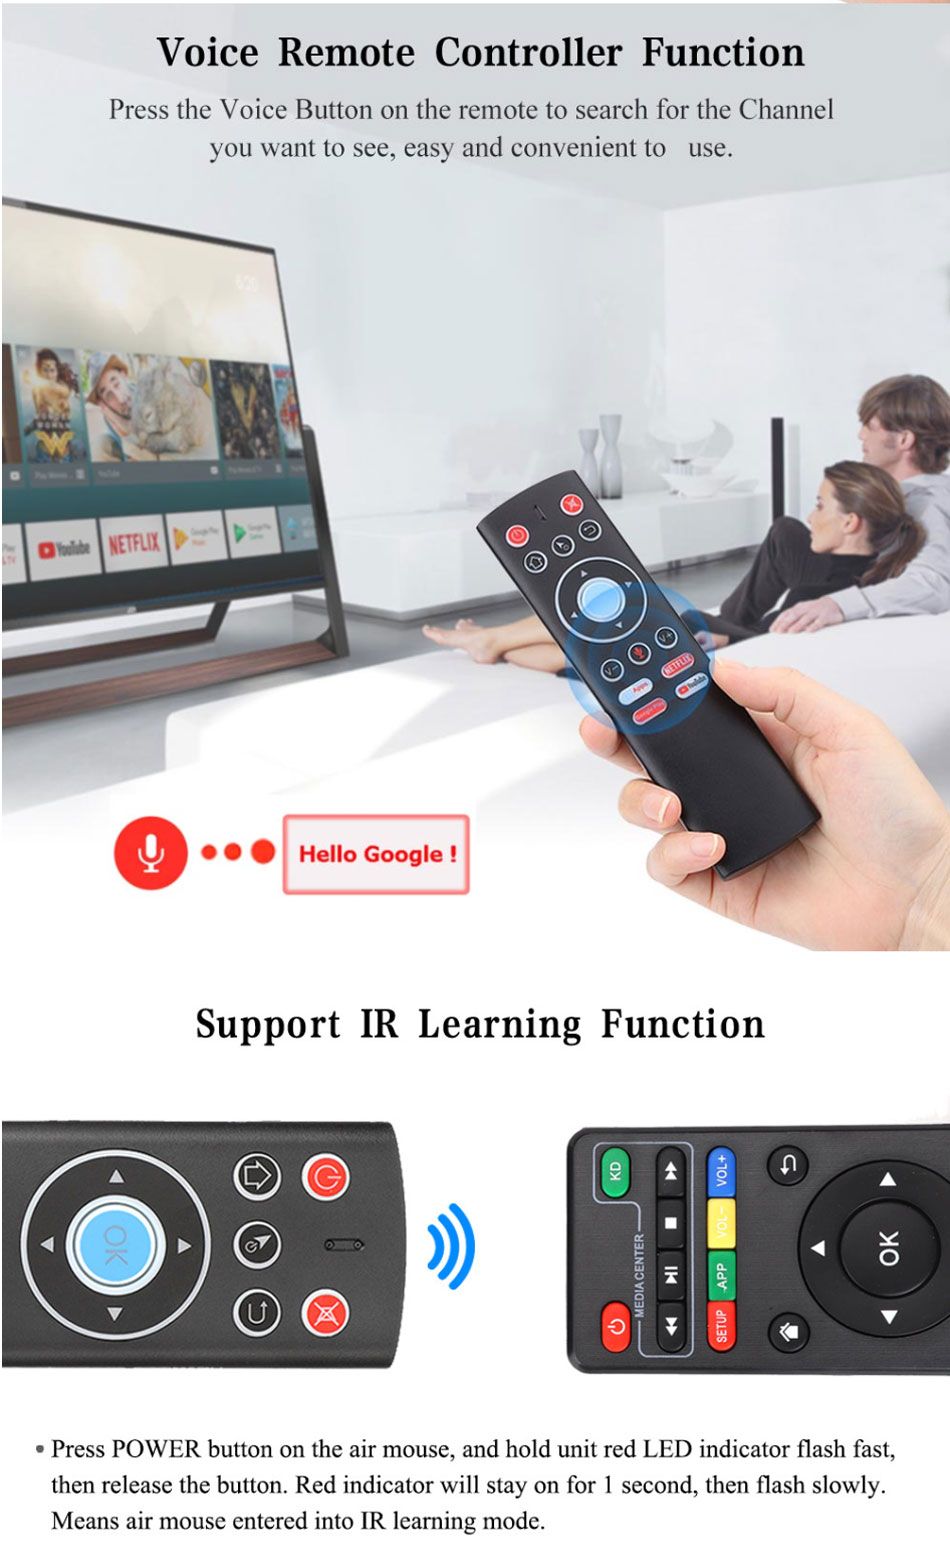 T1-24G-Wireless-6-axis-Gyroscope-Voice-Remote-Control-IR-Learning-for-H96-X88-Pro-A95X-F2-HK1-Max-Mi-1559794